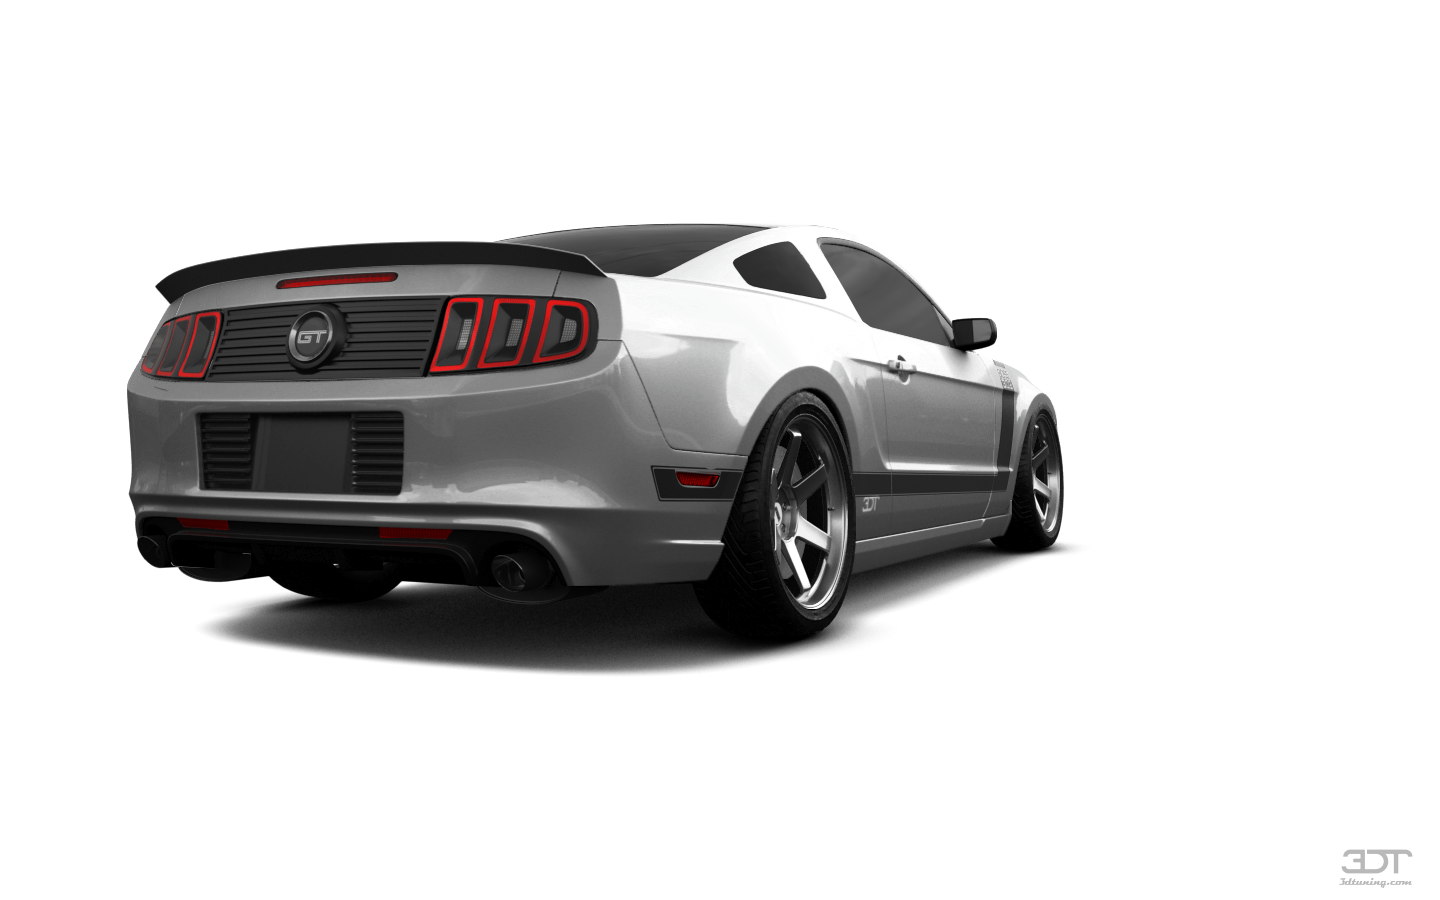 Ford Mustang 2 Door Coupe 2013 tuning